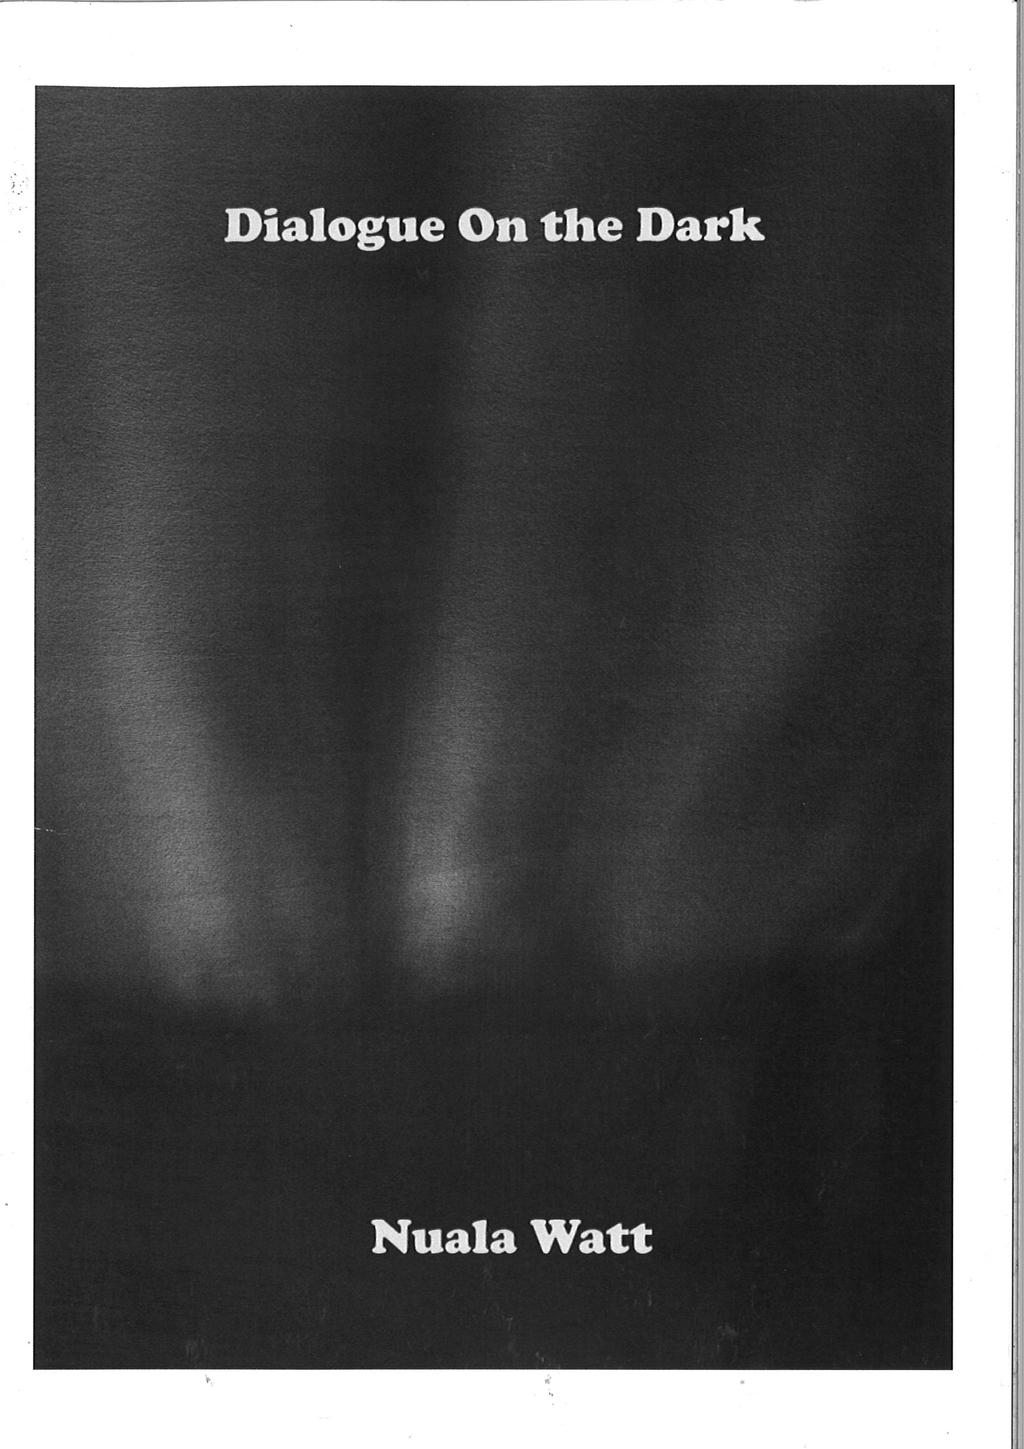 DIALOGUE ON THE DARK 22 poems available from WWW.